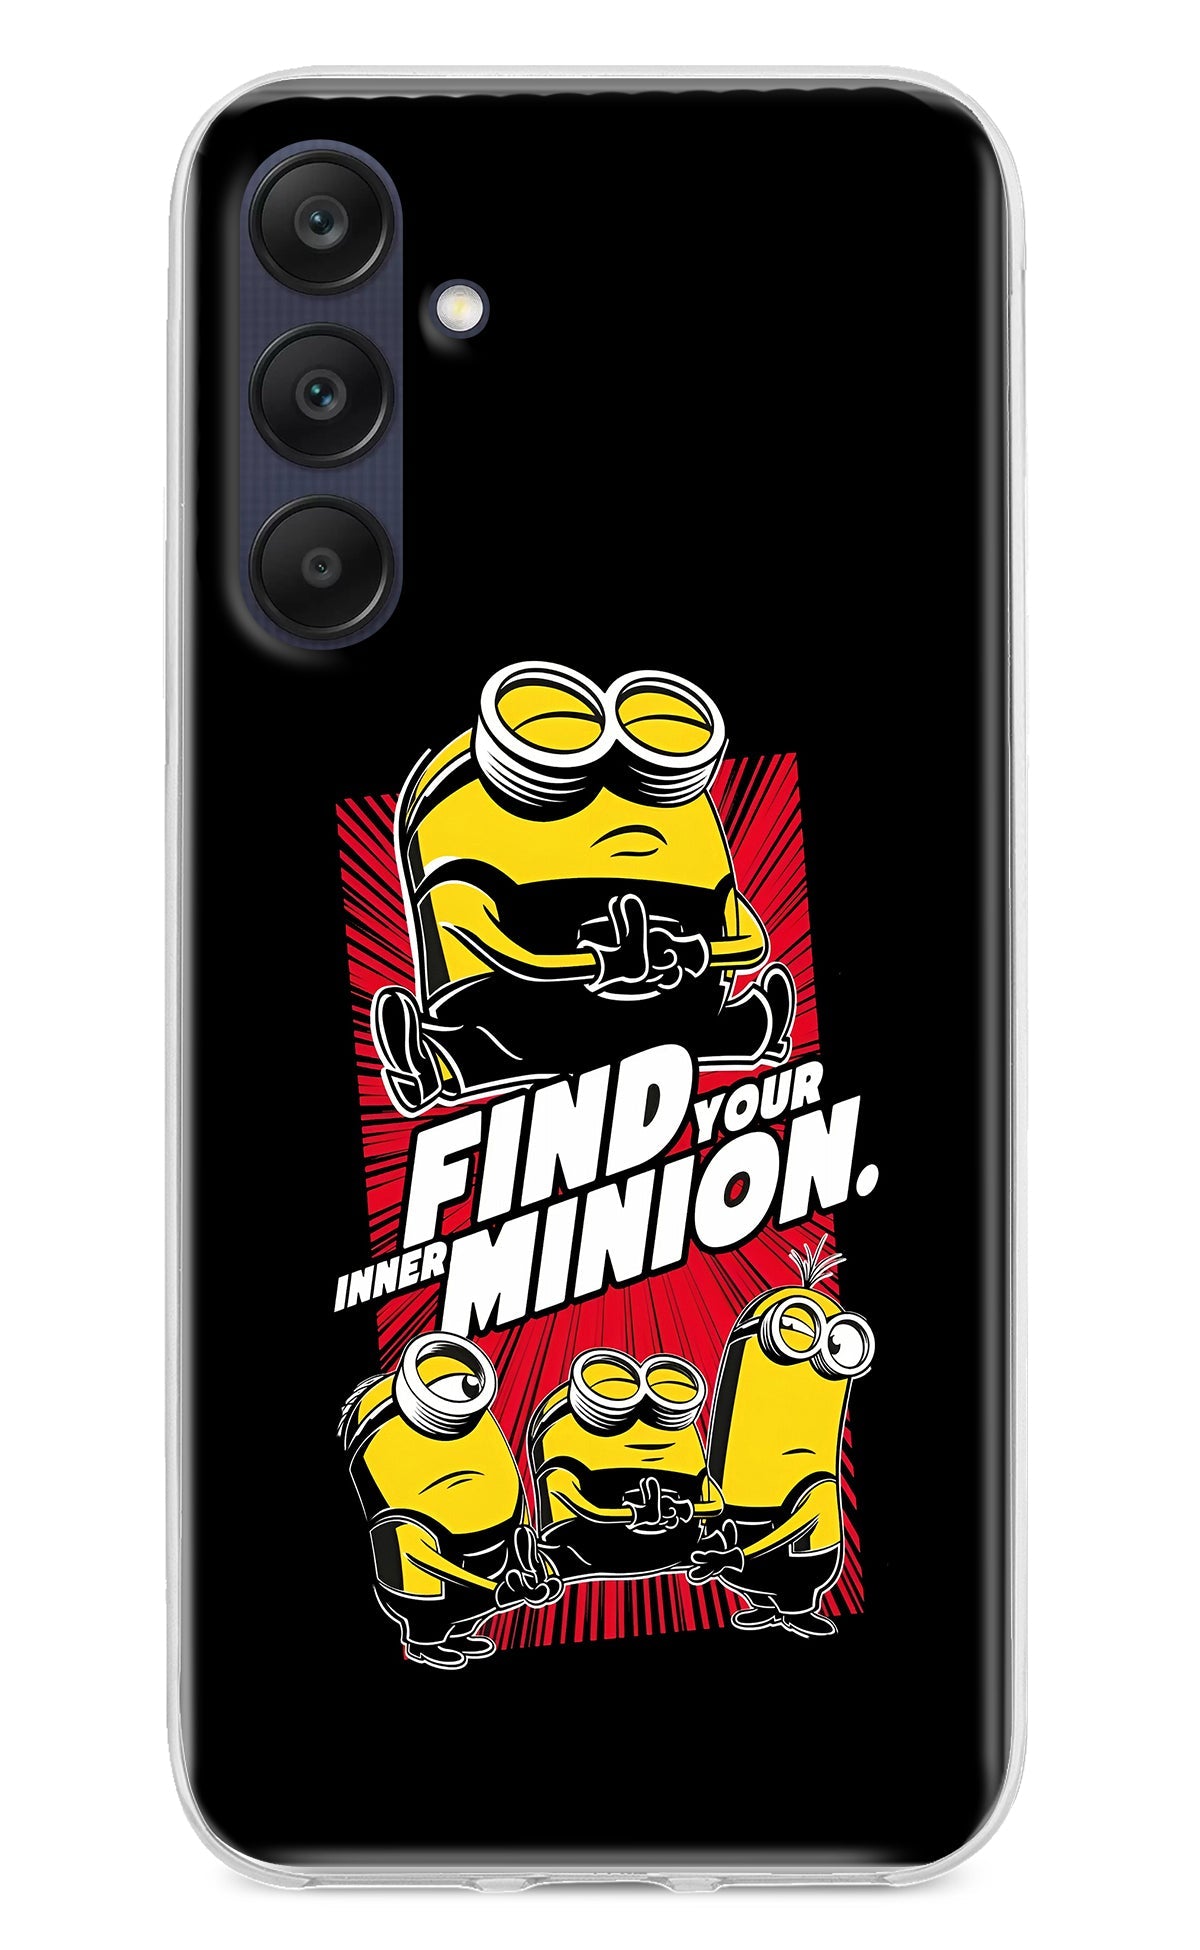 Find your inner Minion Samsung A25 5G Back Cover